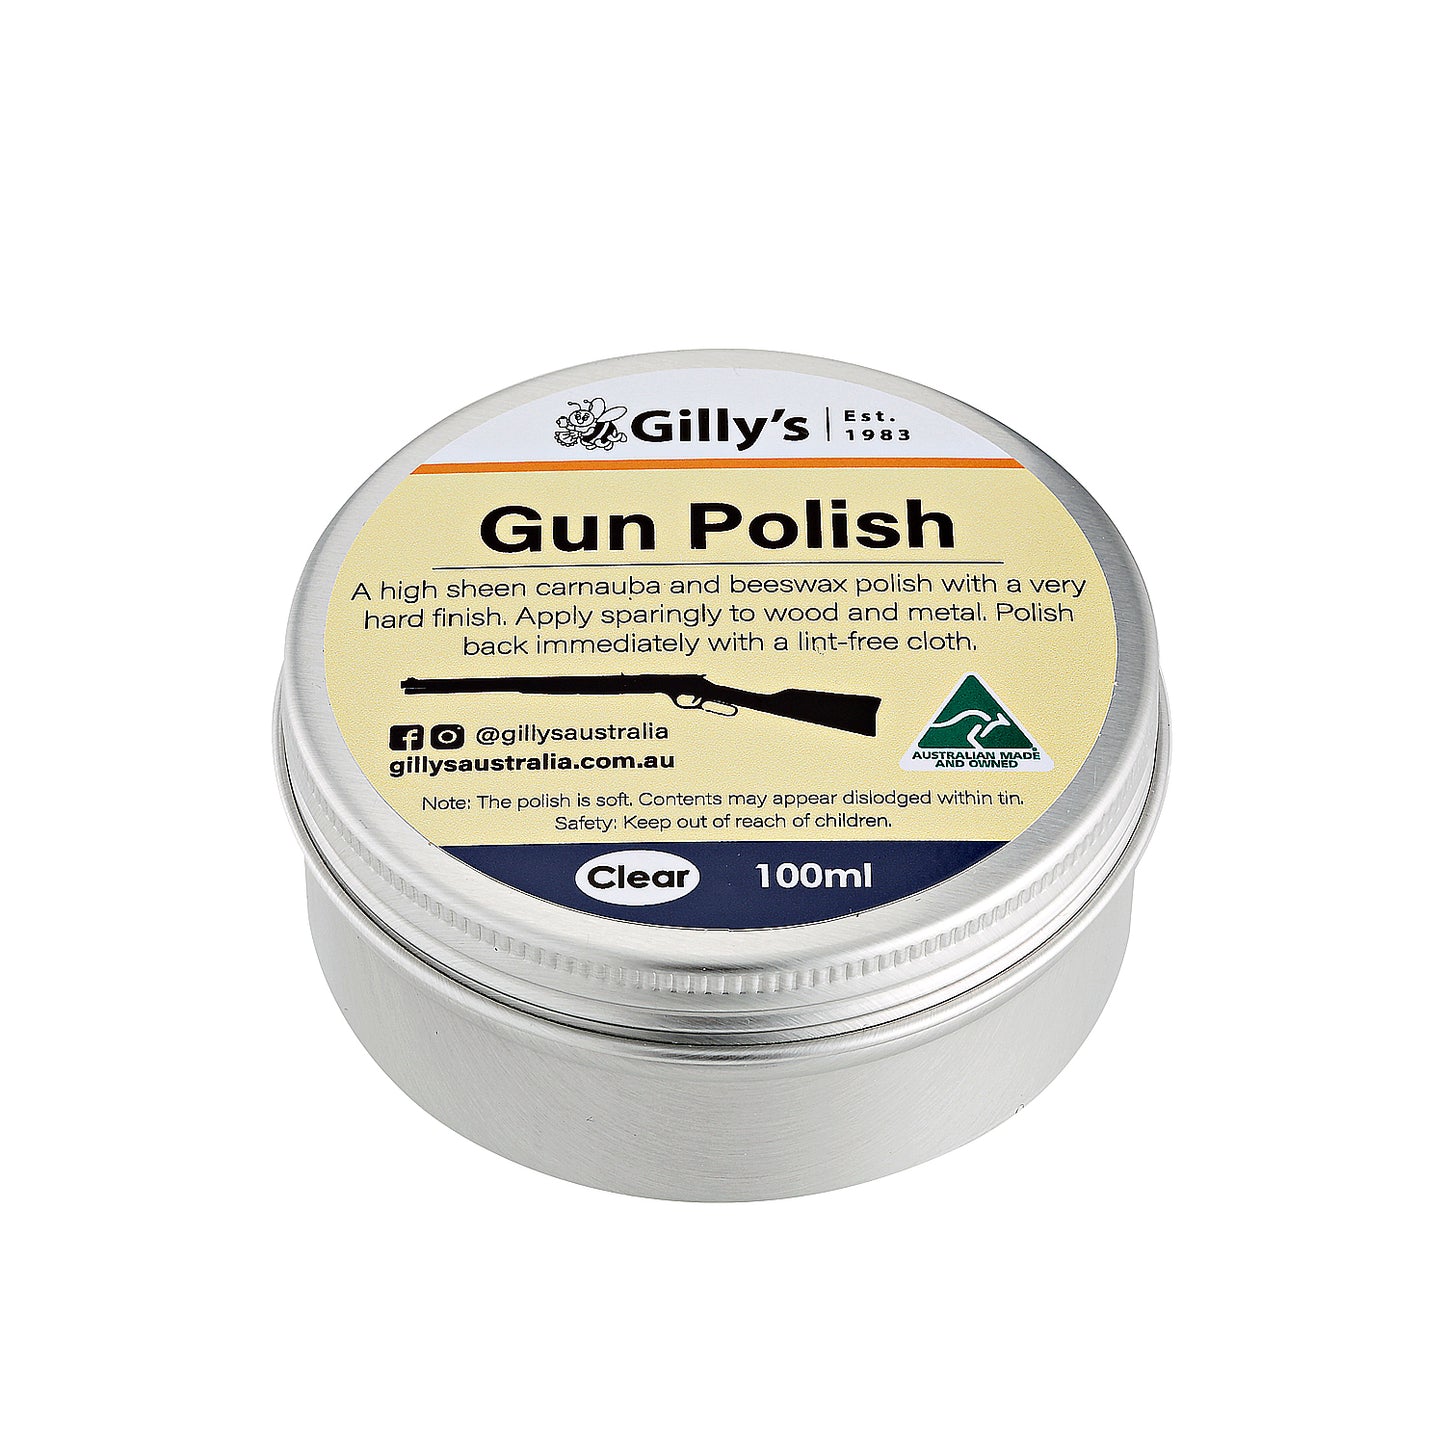 Load image into Gallery viewer, Gun Polish 100ml Gillys
